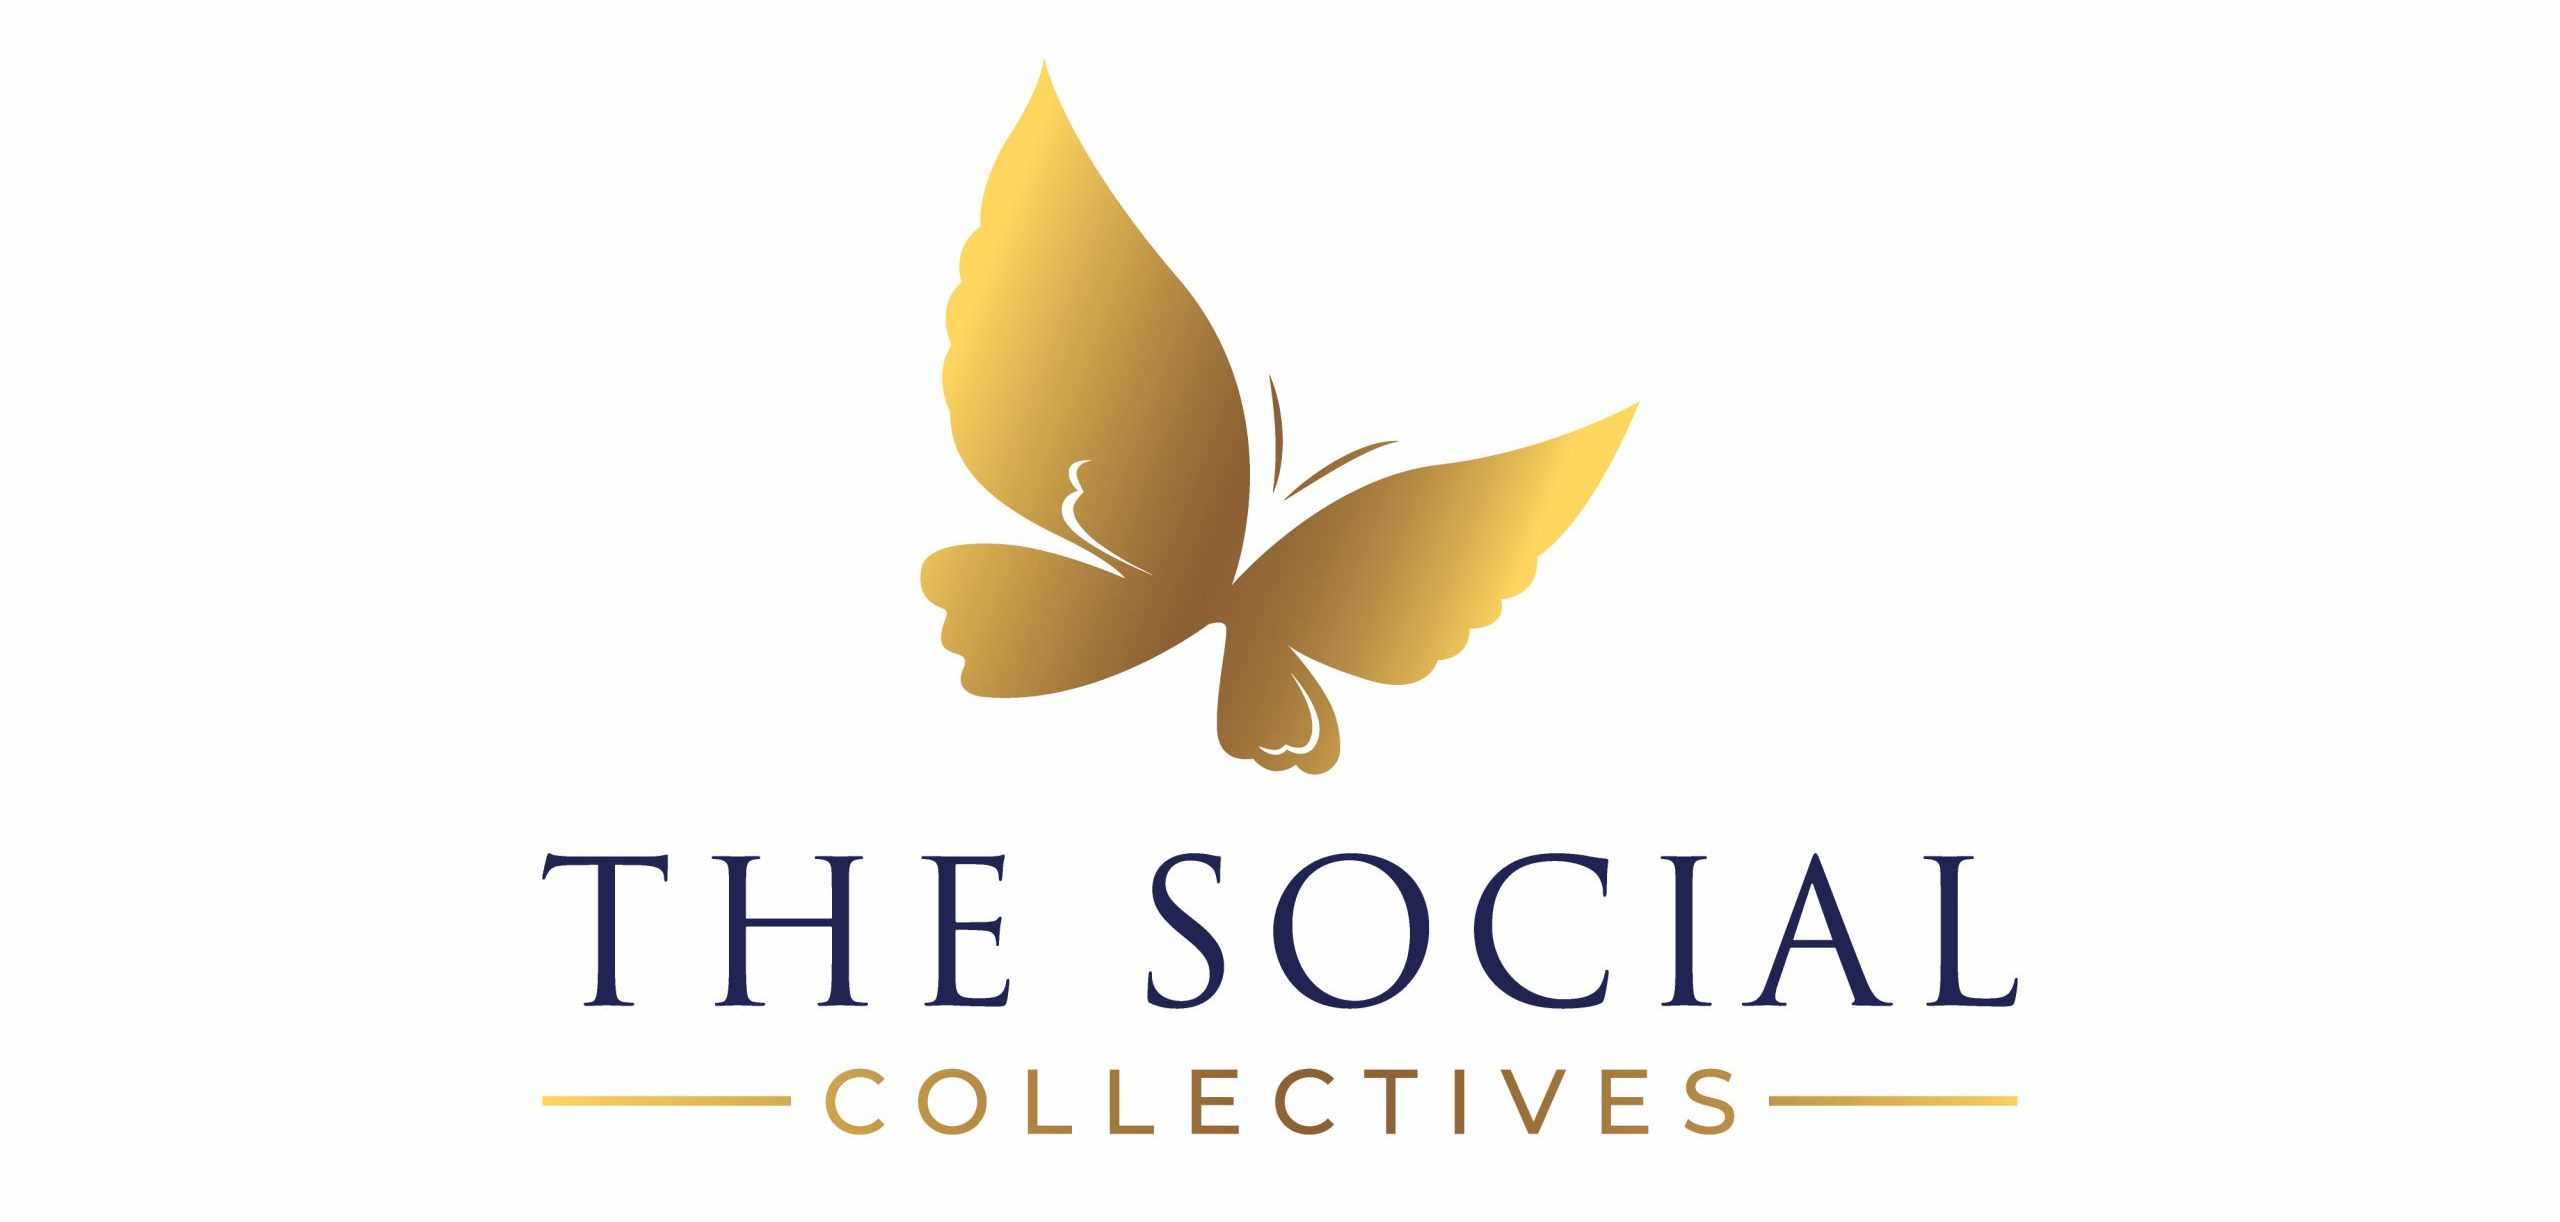 The Sopcial Collectives